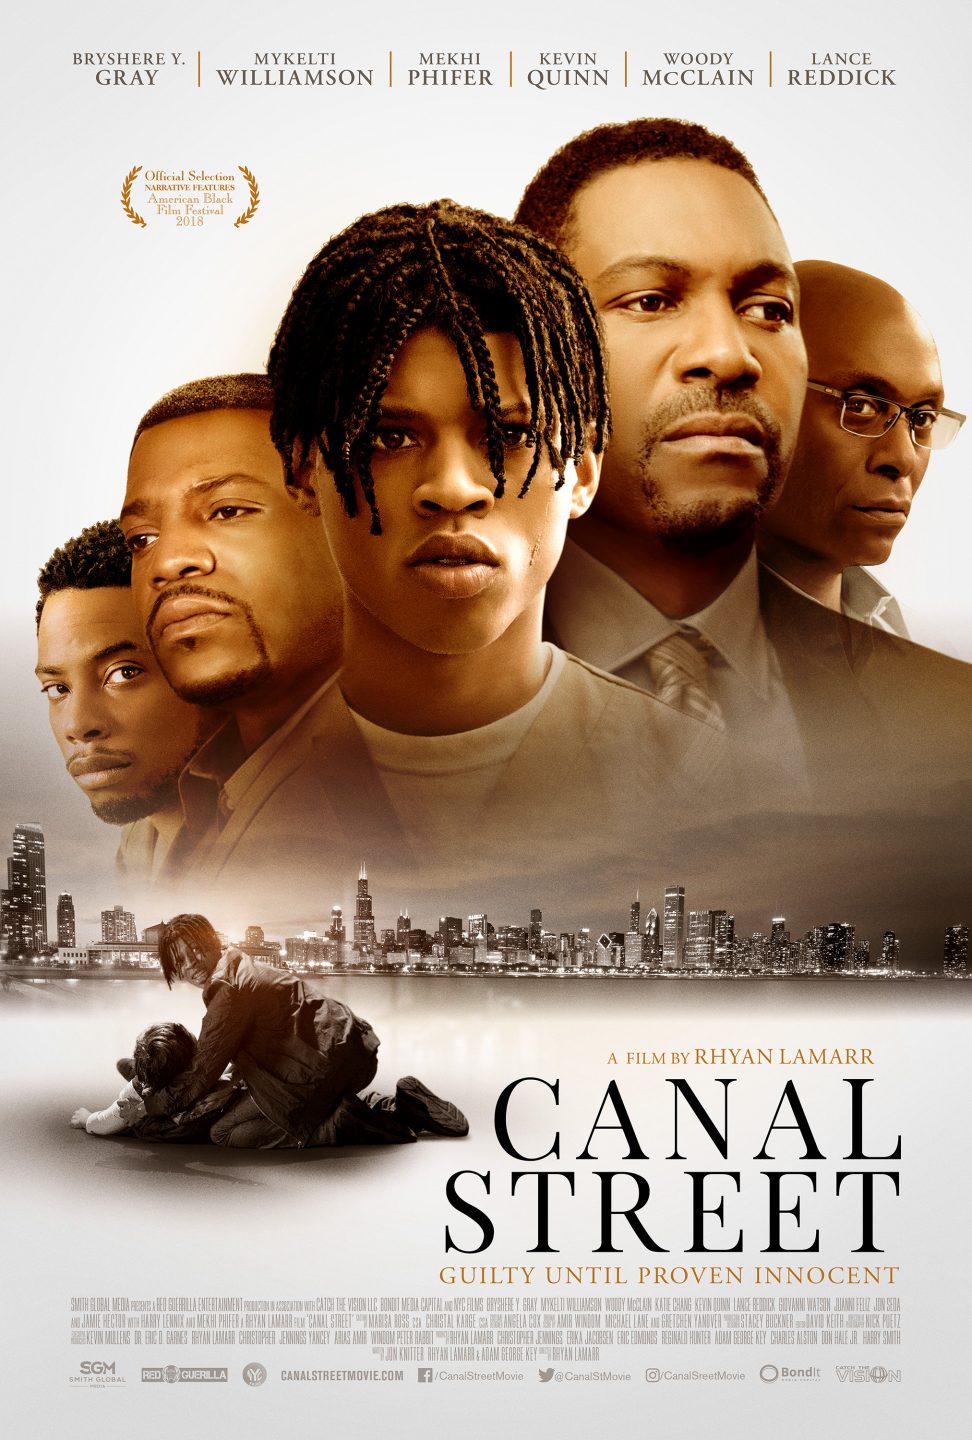 Canal Street poster (Smith Global Media)